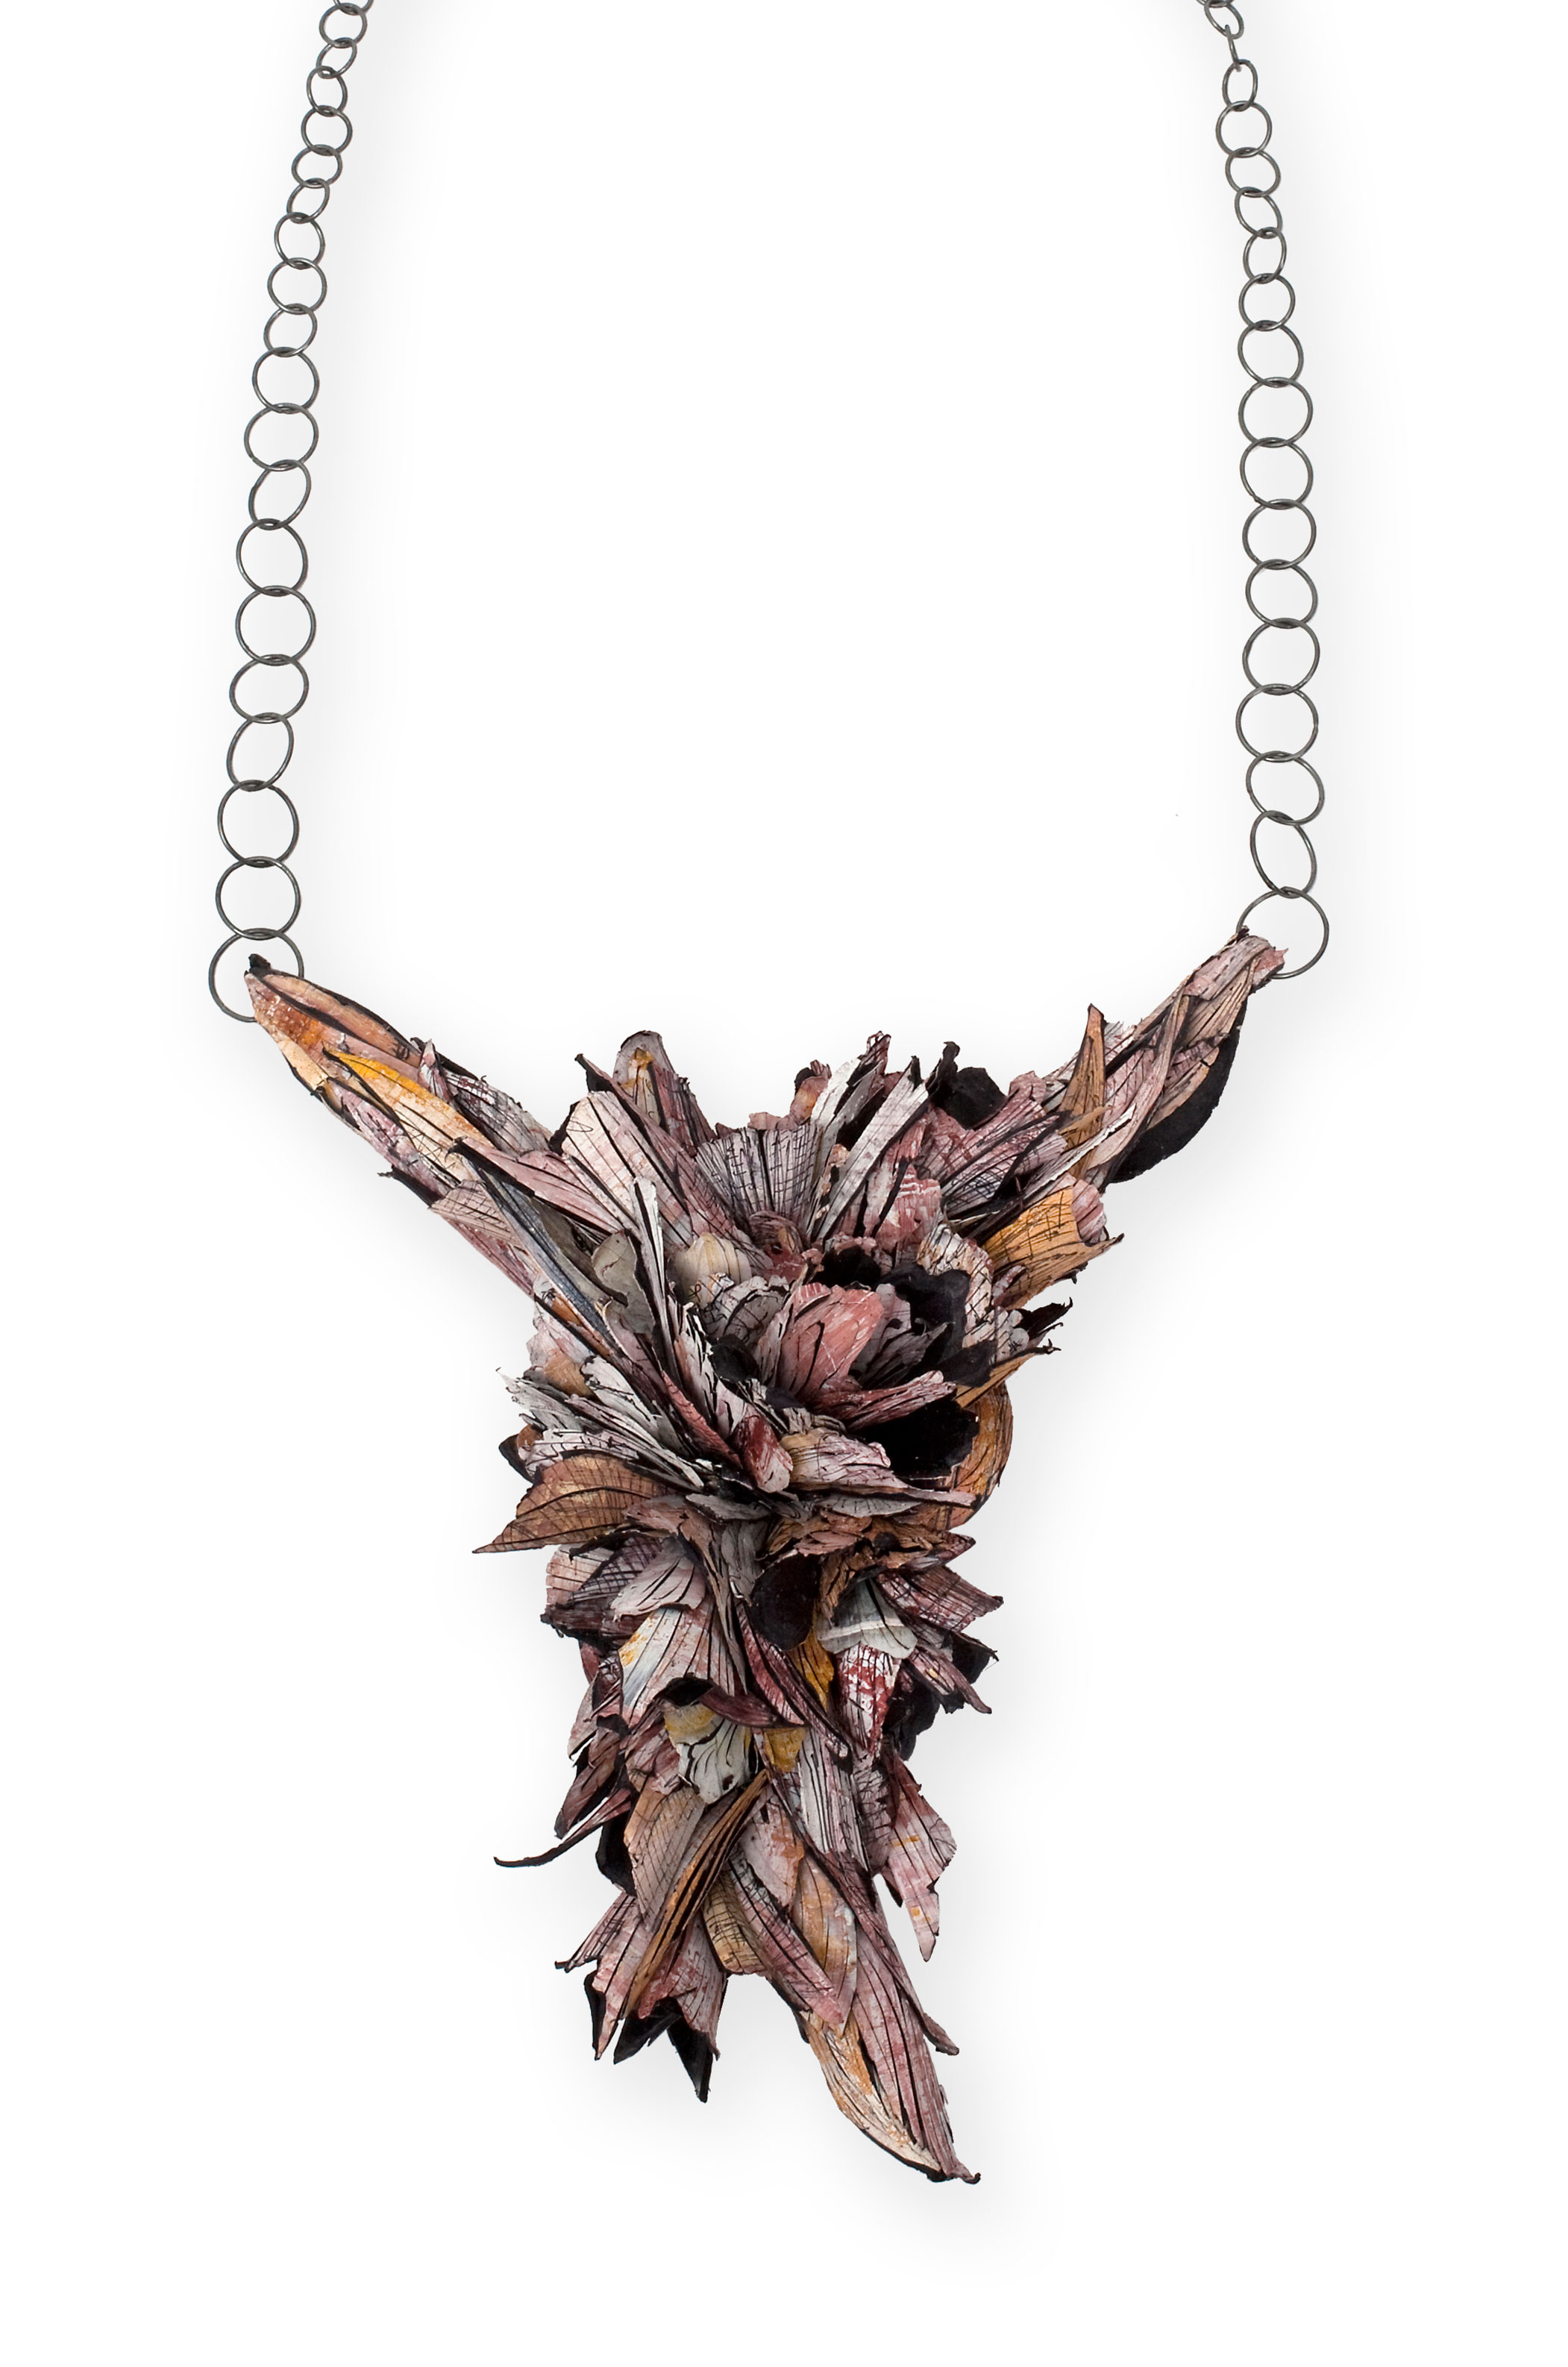 Untitled | Necklace | 2014 | Treated cellulose, coal, paint, glue, silver | 220X170X950 mm